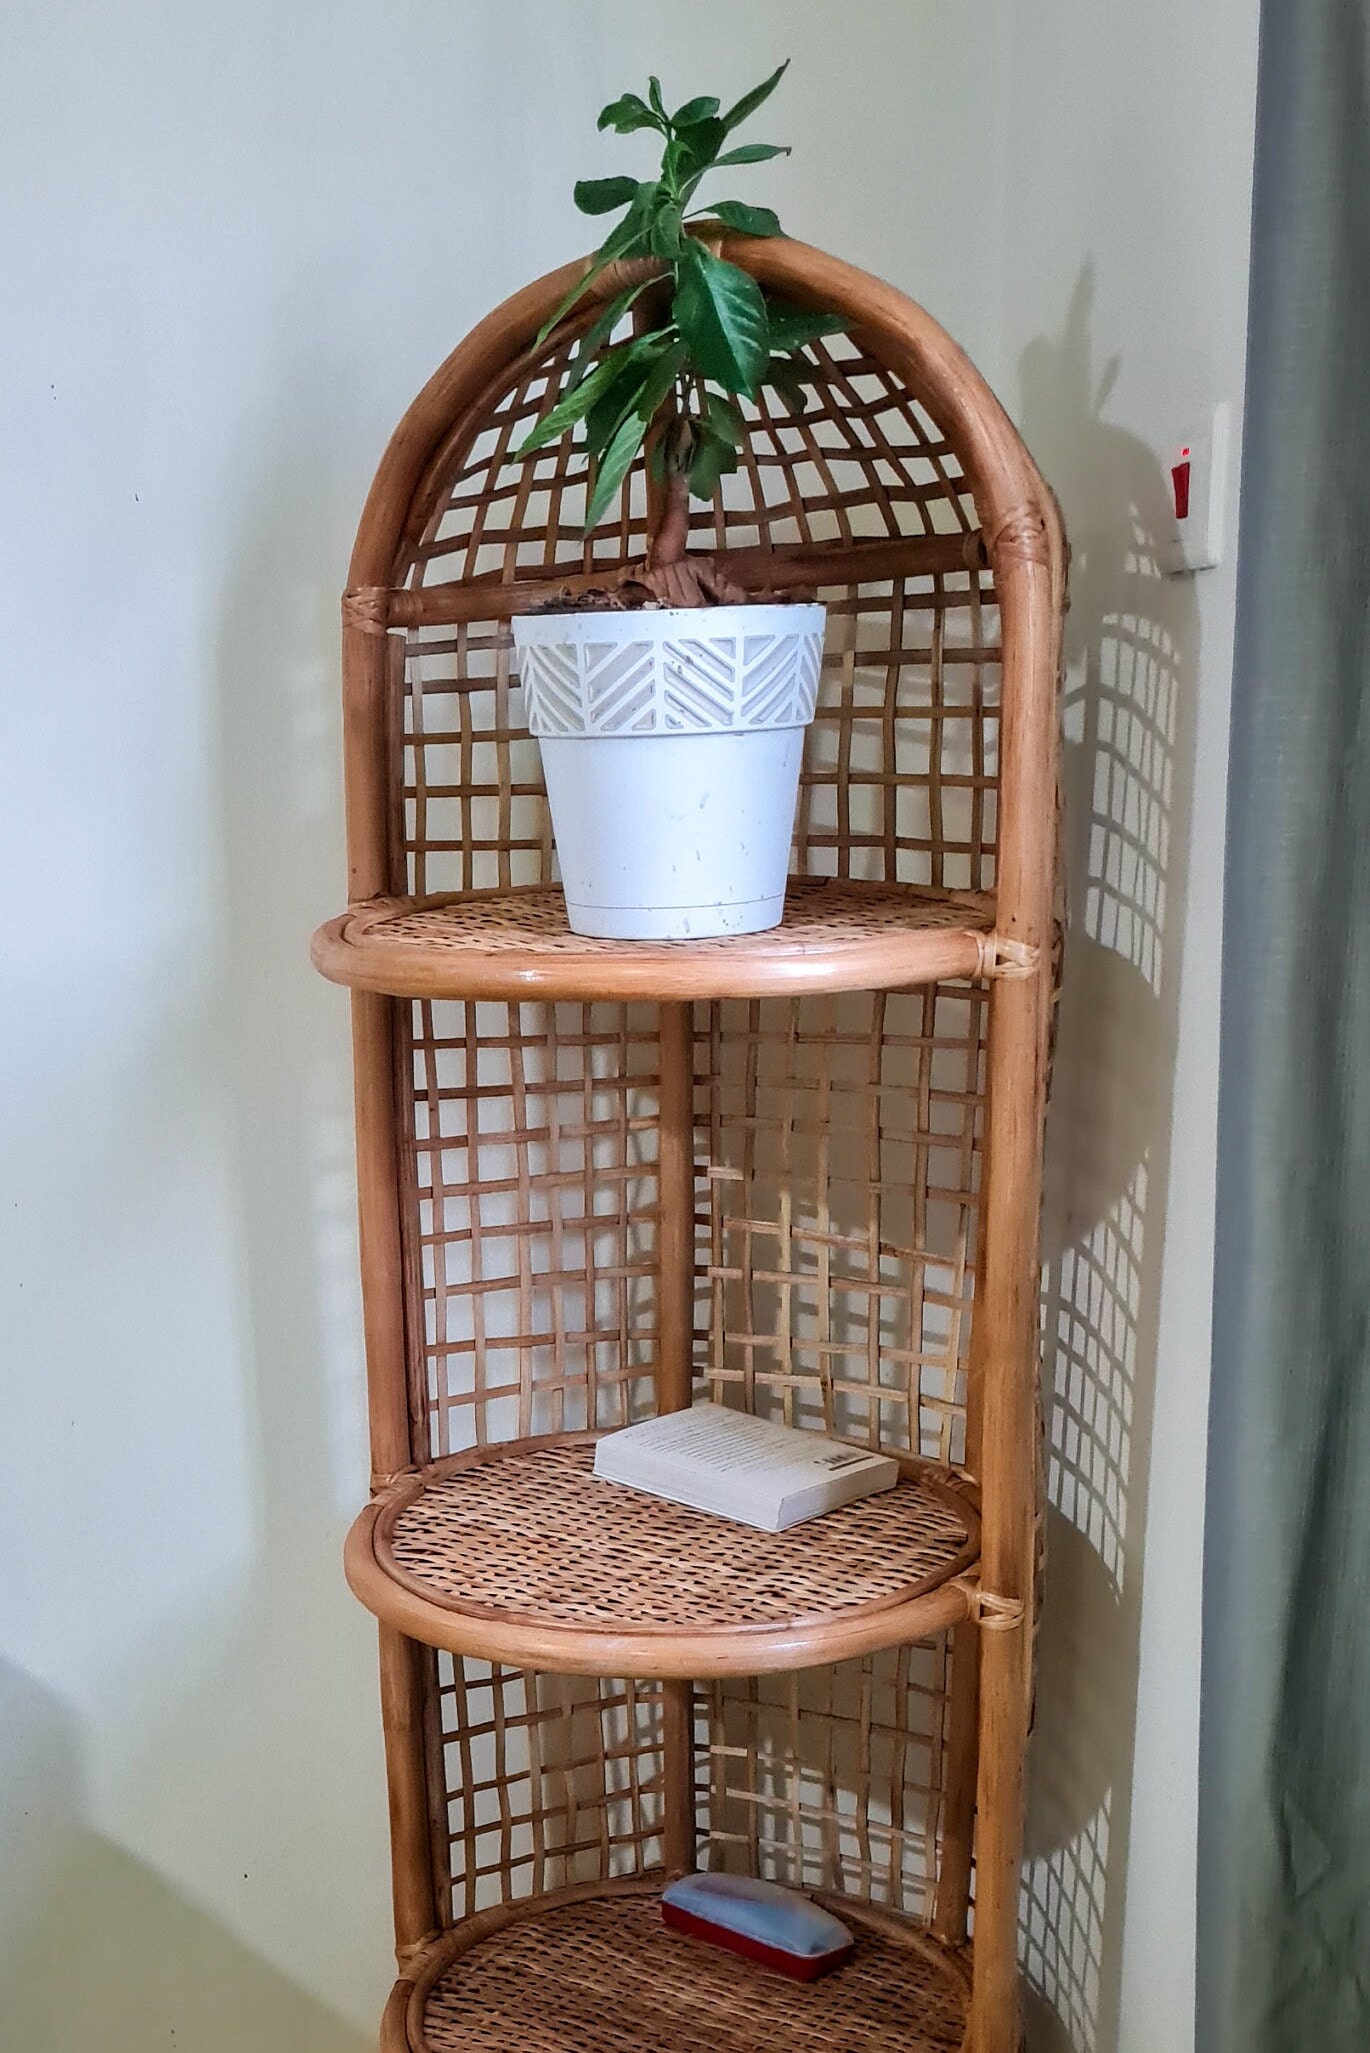 Excellerations® Wicker Shelf with Two Small Baskets